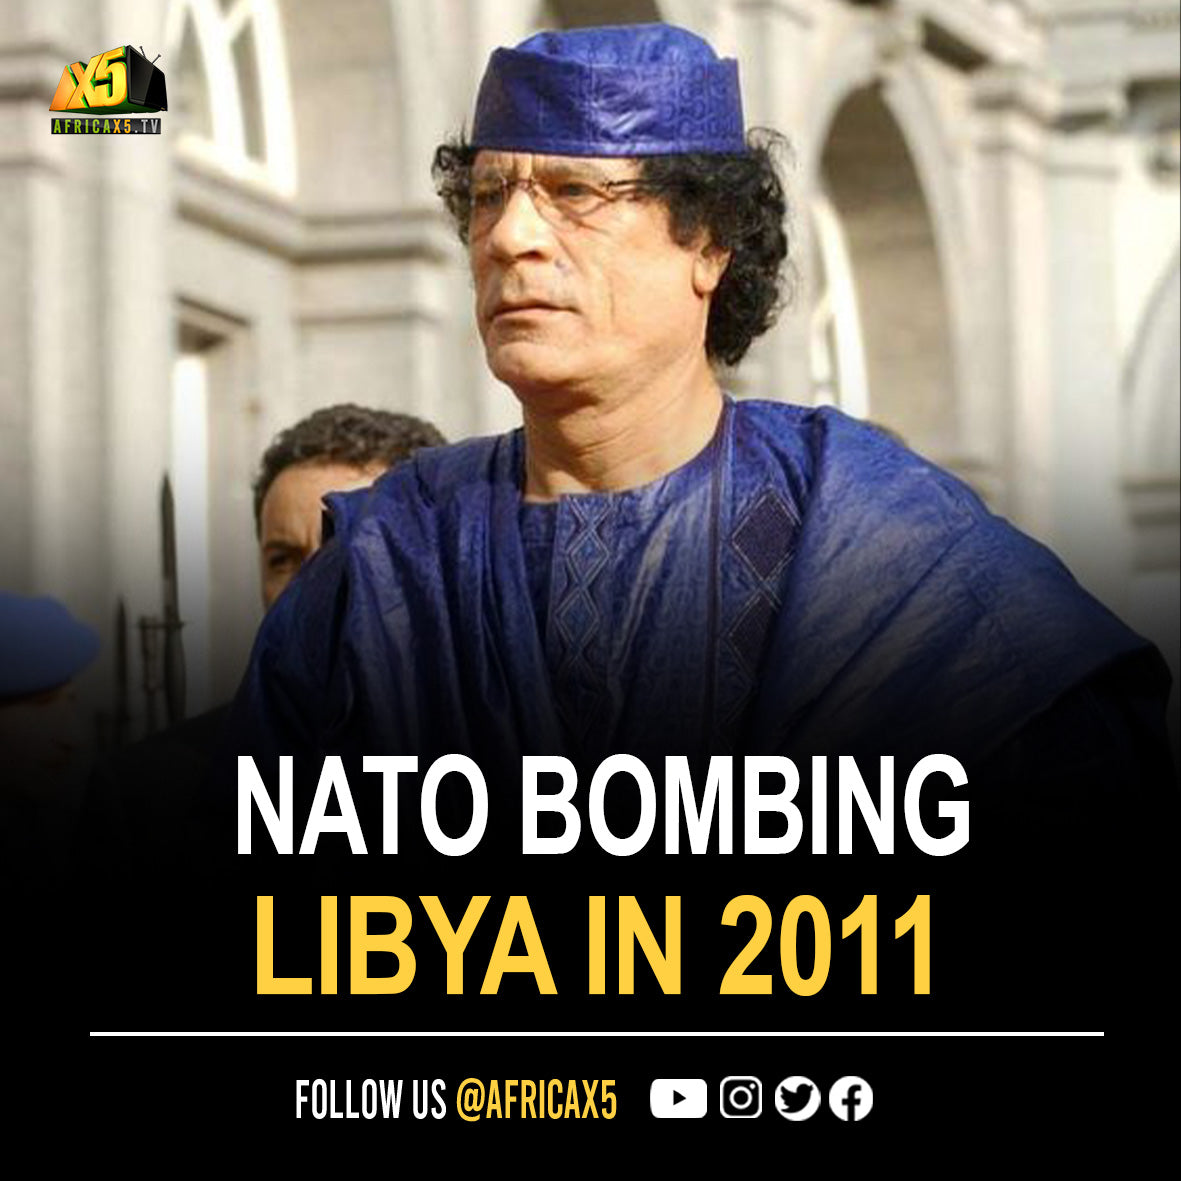 NATO launched more than 10,000 air raids on Libya in 2011 with over 100,000 Civilian Casualities.